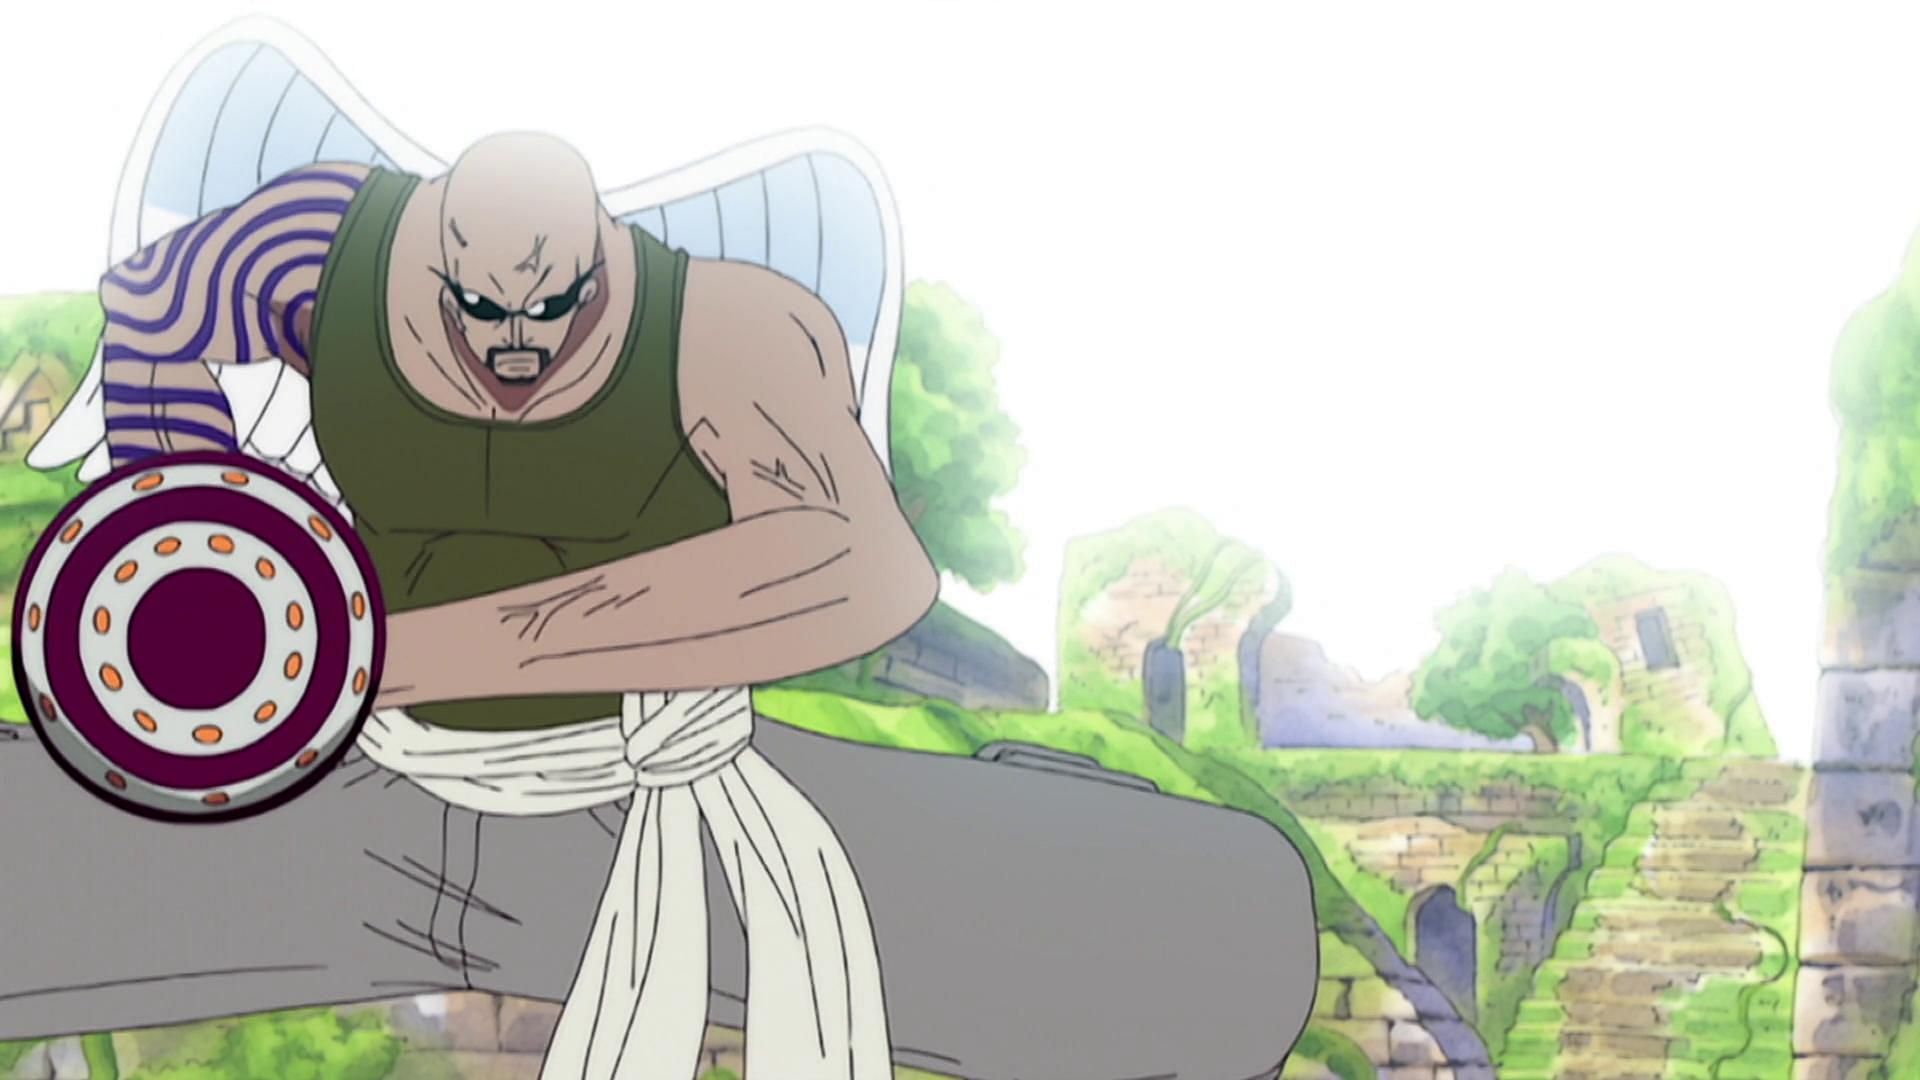 Ohm as seen in the One Piece anime (Image via Toei Animation)